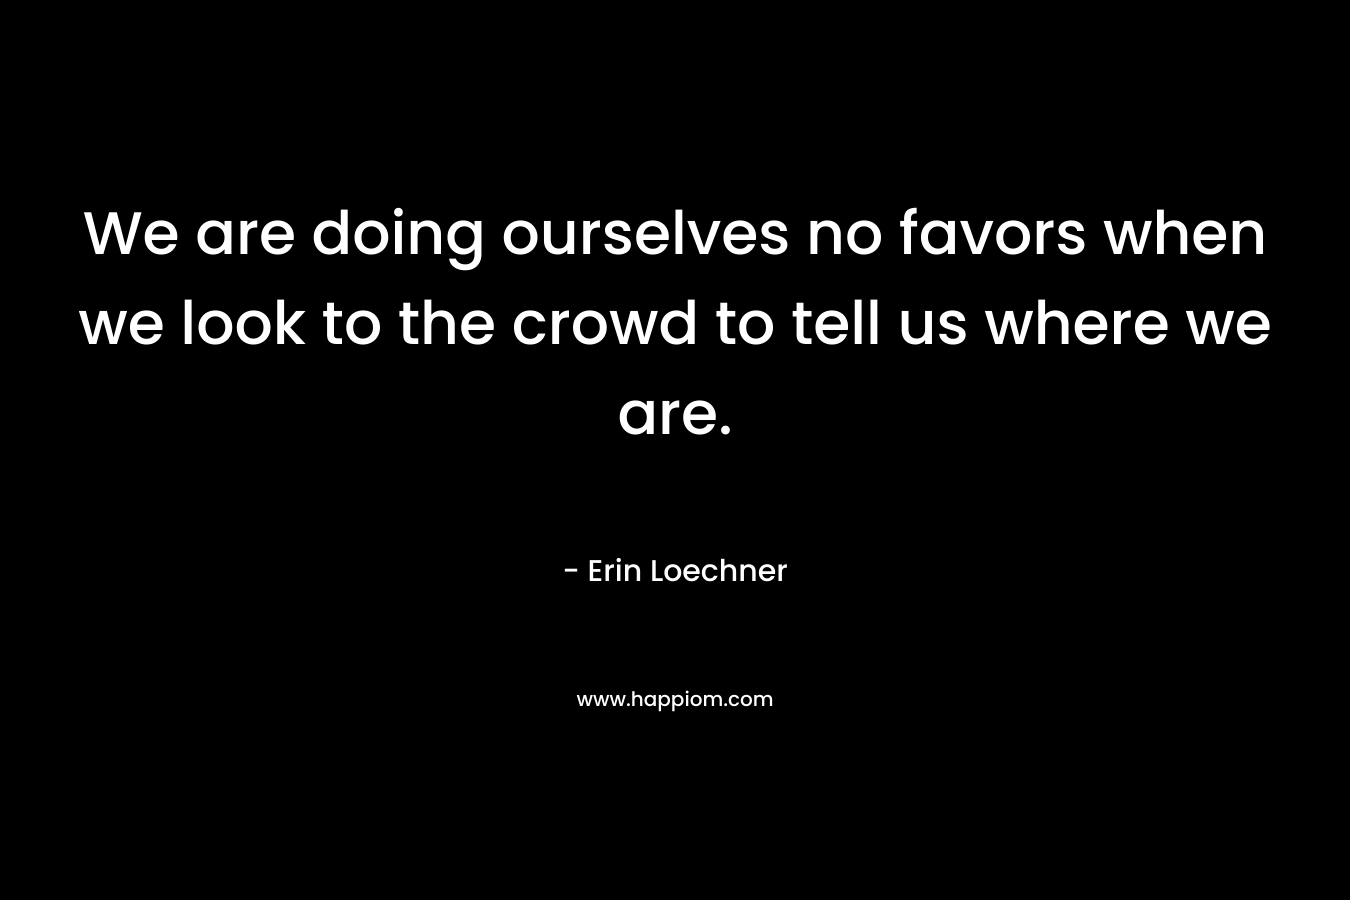 We are doing ourselves no favors when we look to the crowd to tell us where we are.